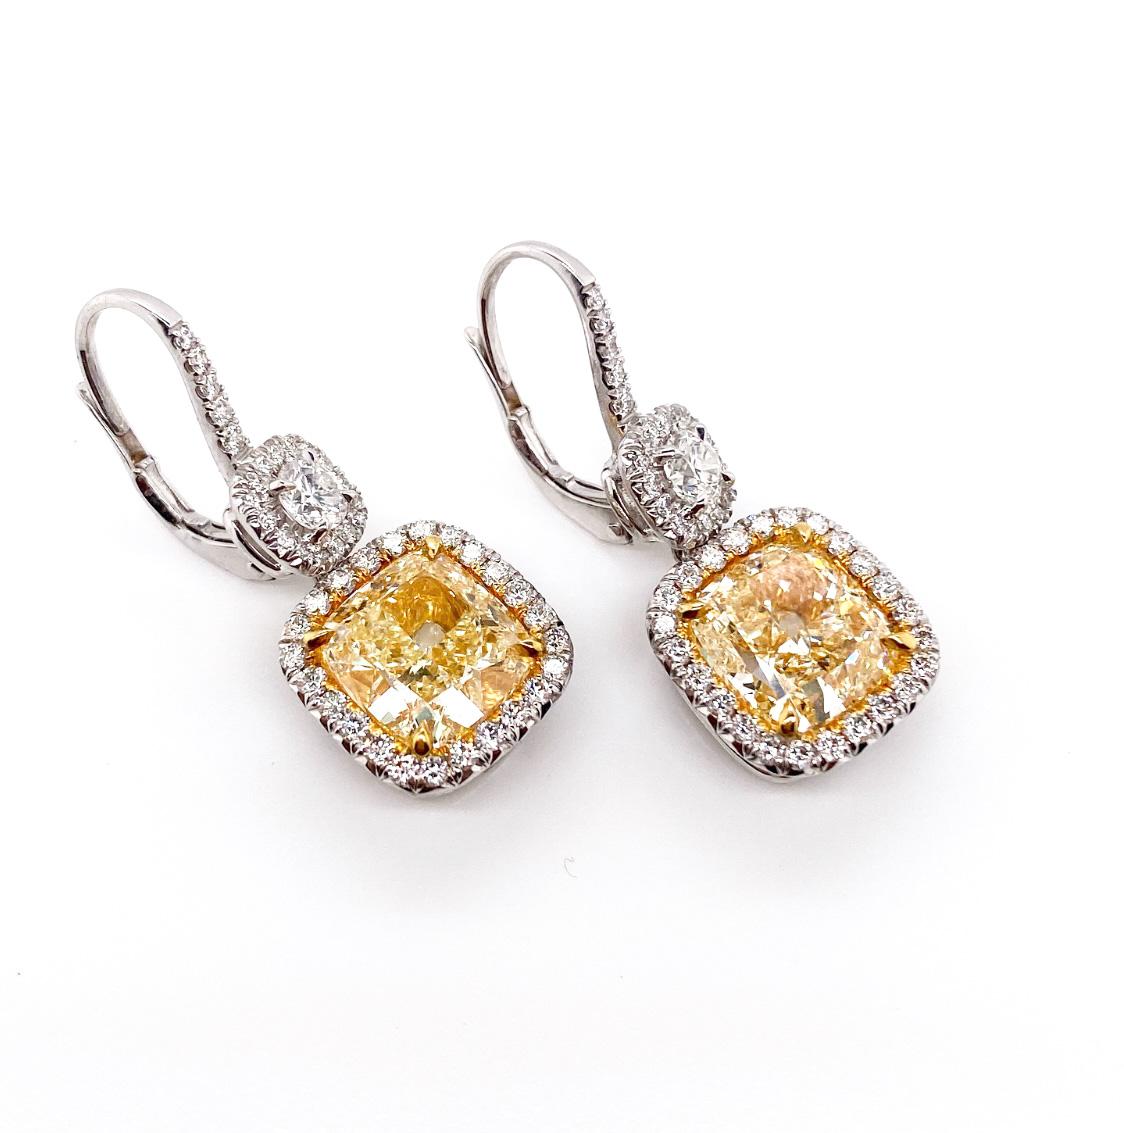 Make a glamorous statement with these timeless elegance dangle earrings. The very beautiful GIA certified yellow cushion diamonds perfectly framed with the sparkling white diamonds. In additional, 0.48 carat brilliant round diamond pair surrounded